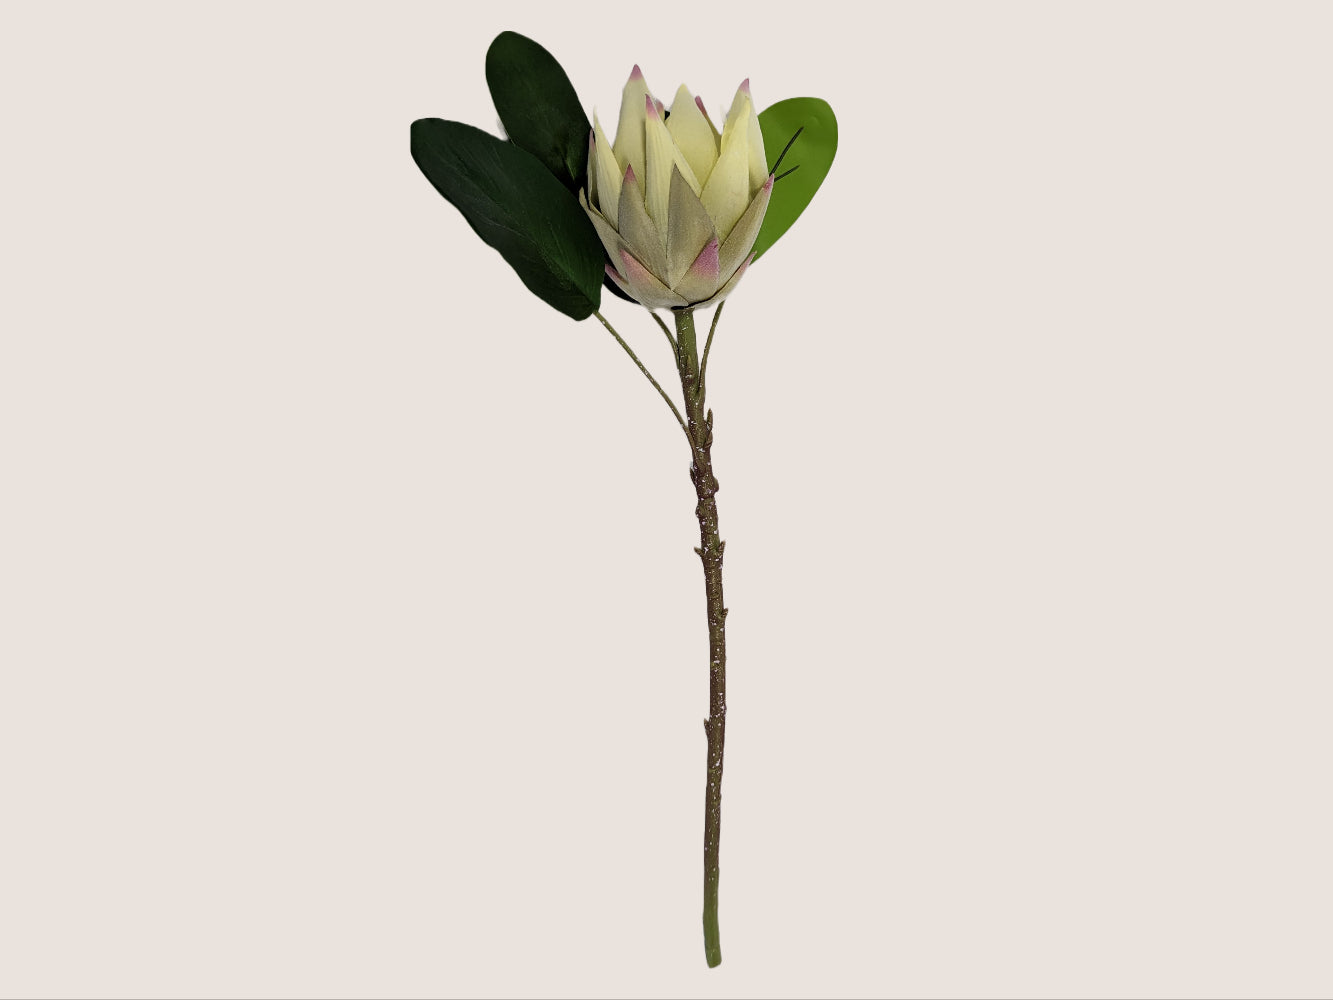 An artificial king protea flower with cream and pink petals and a dark green stem and leaves on a white background. The flower head is about 6 inches in diameter and has a slightly fuzzy texture. The stem is 28 inches long and can be bent or cut to fit different vases. Flower is pictured against a neutral beige background.